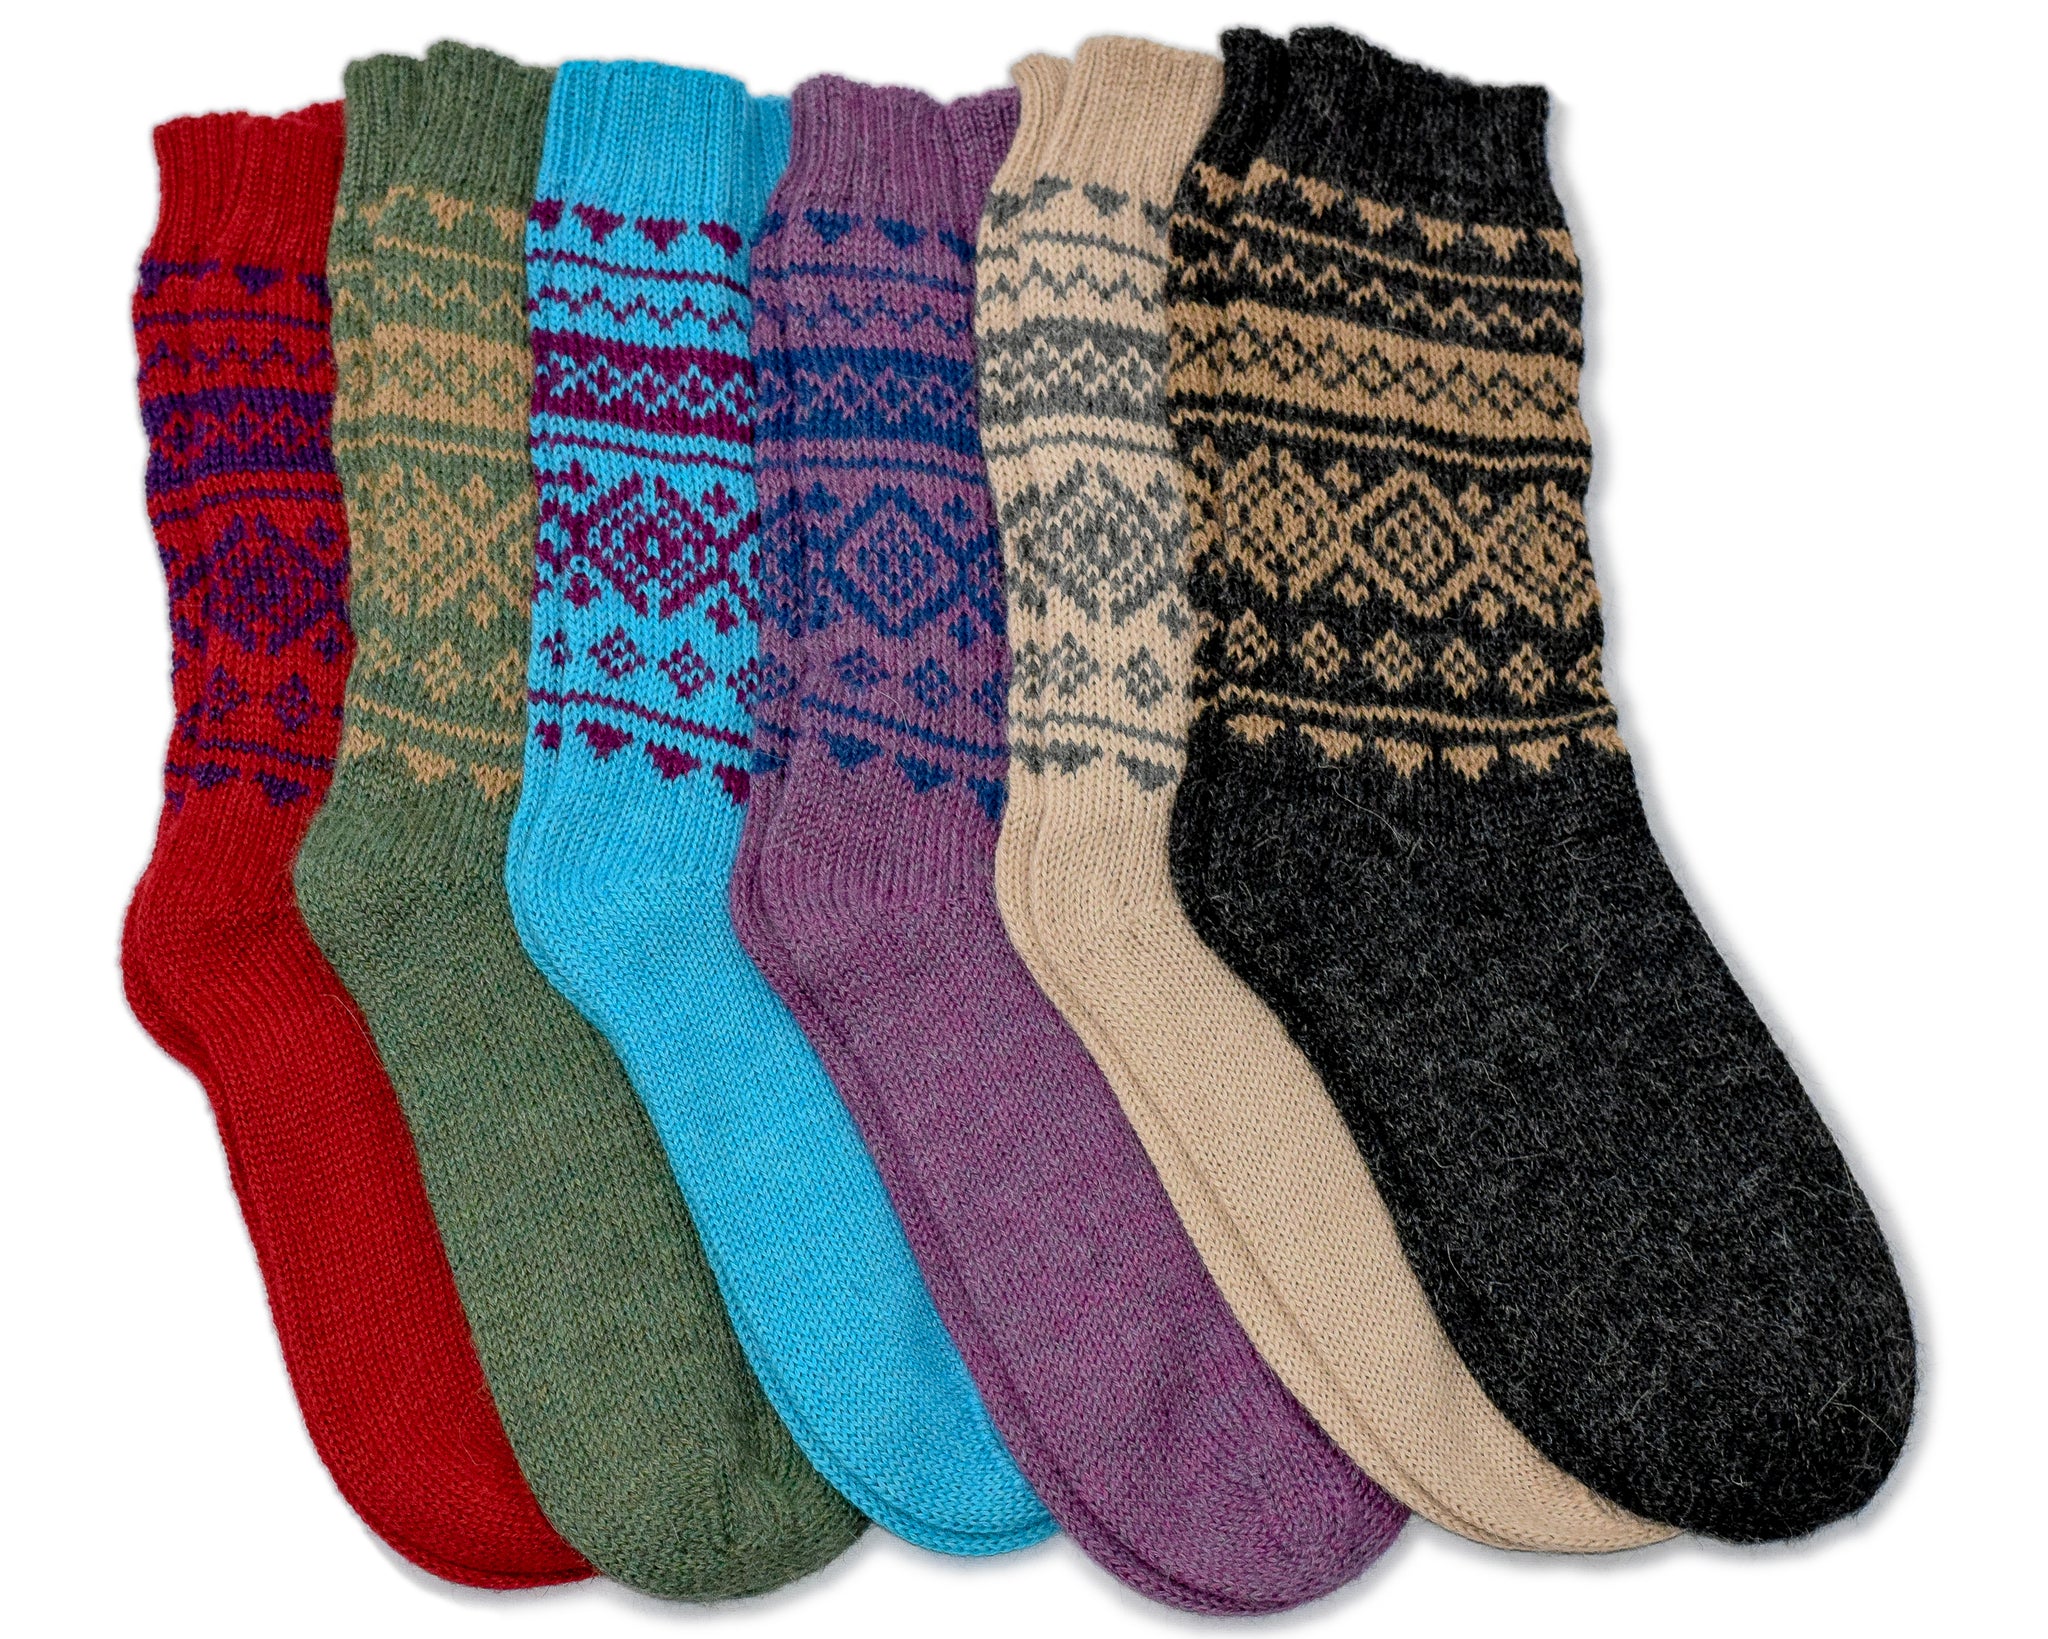 Unique Sheep's Wool Socks 100% Natural Warm Handmade Casual All Sizes New